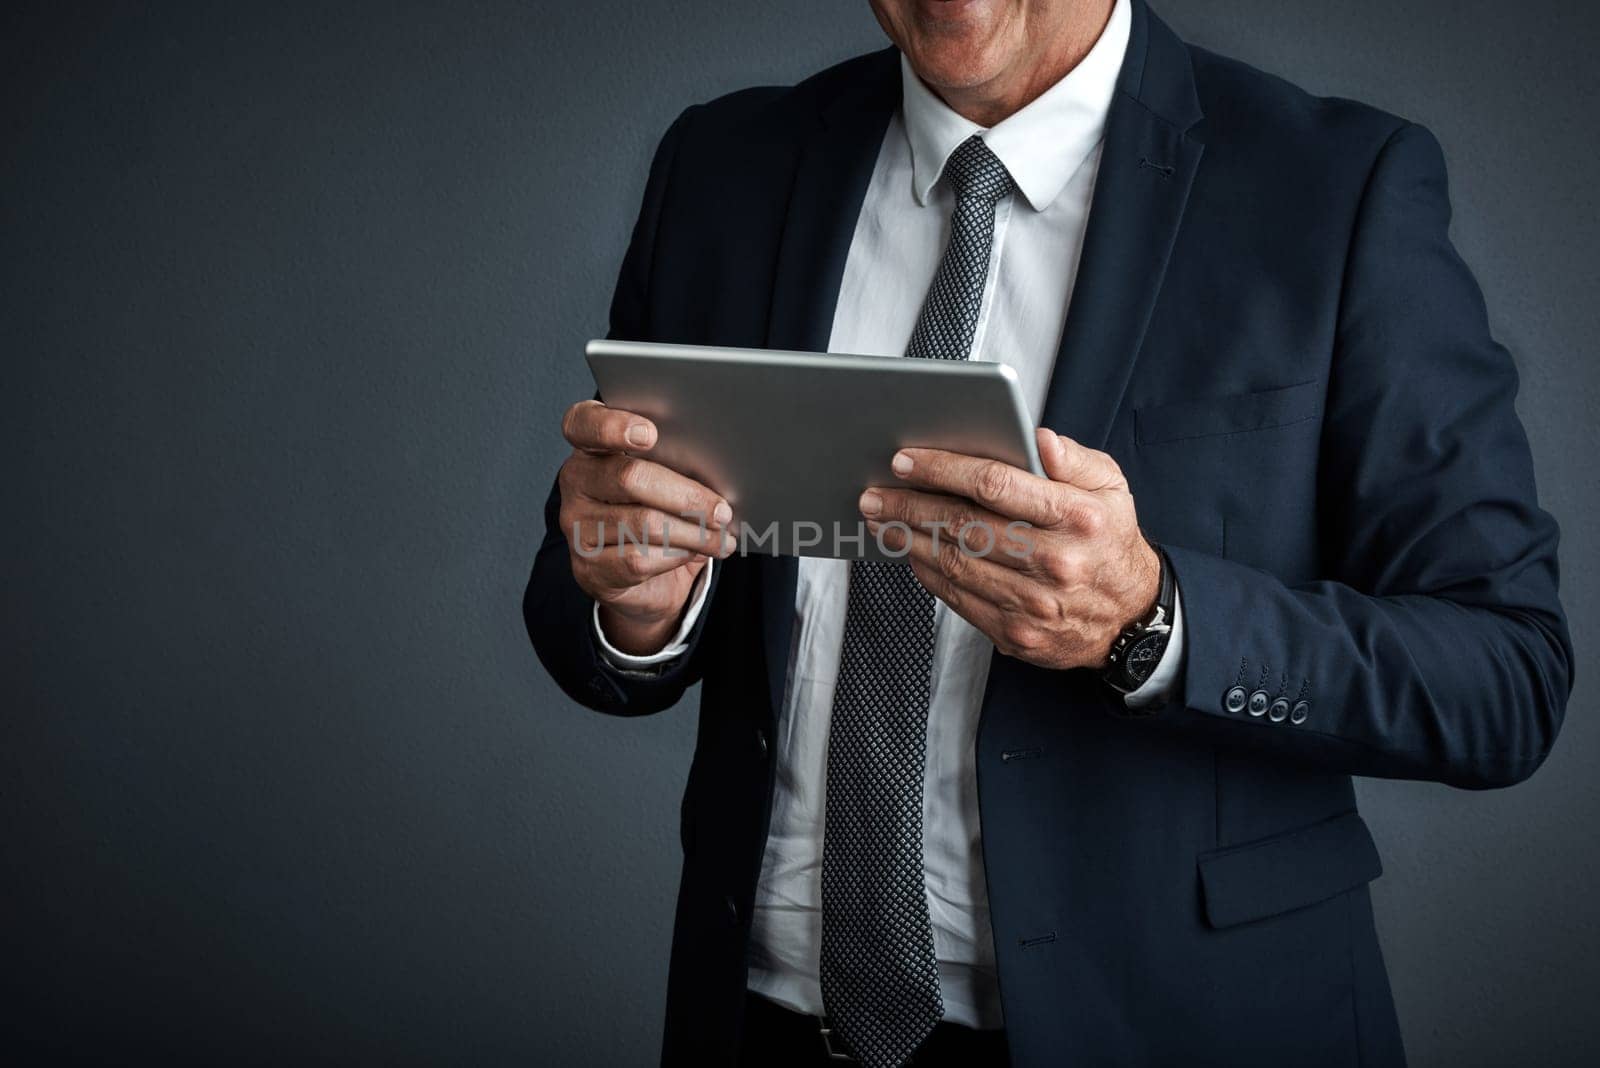 9 to 5 is a thing of the past. Studio shot of a mature businessman using his digital tablet